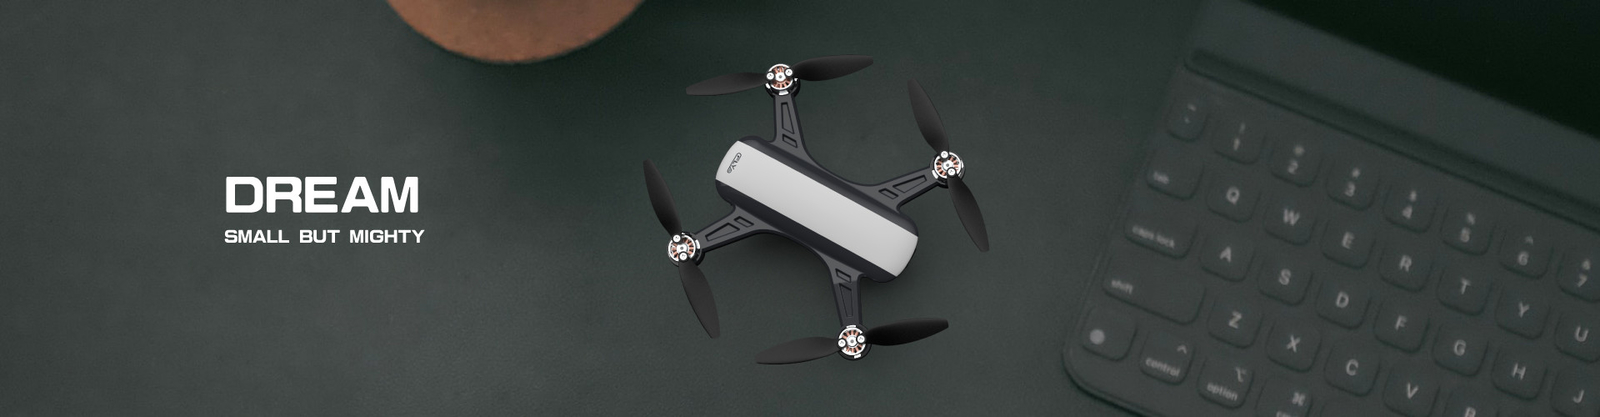 quality Cfly Drone factory